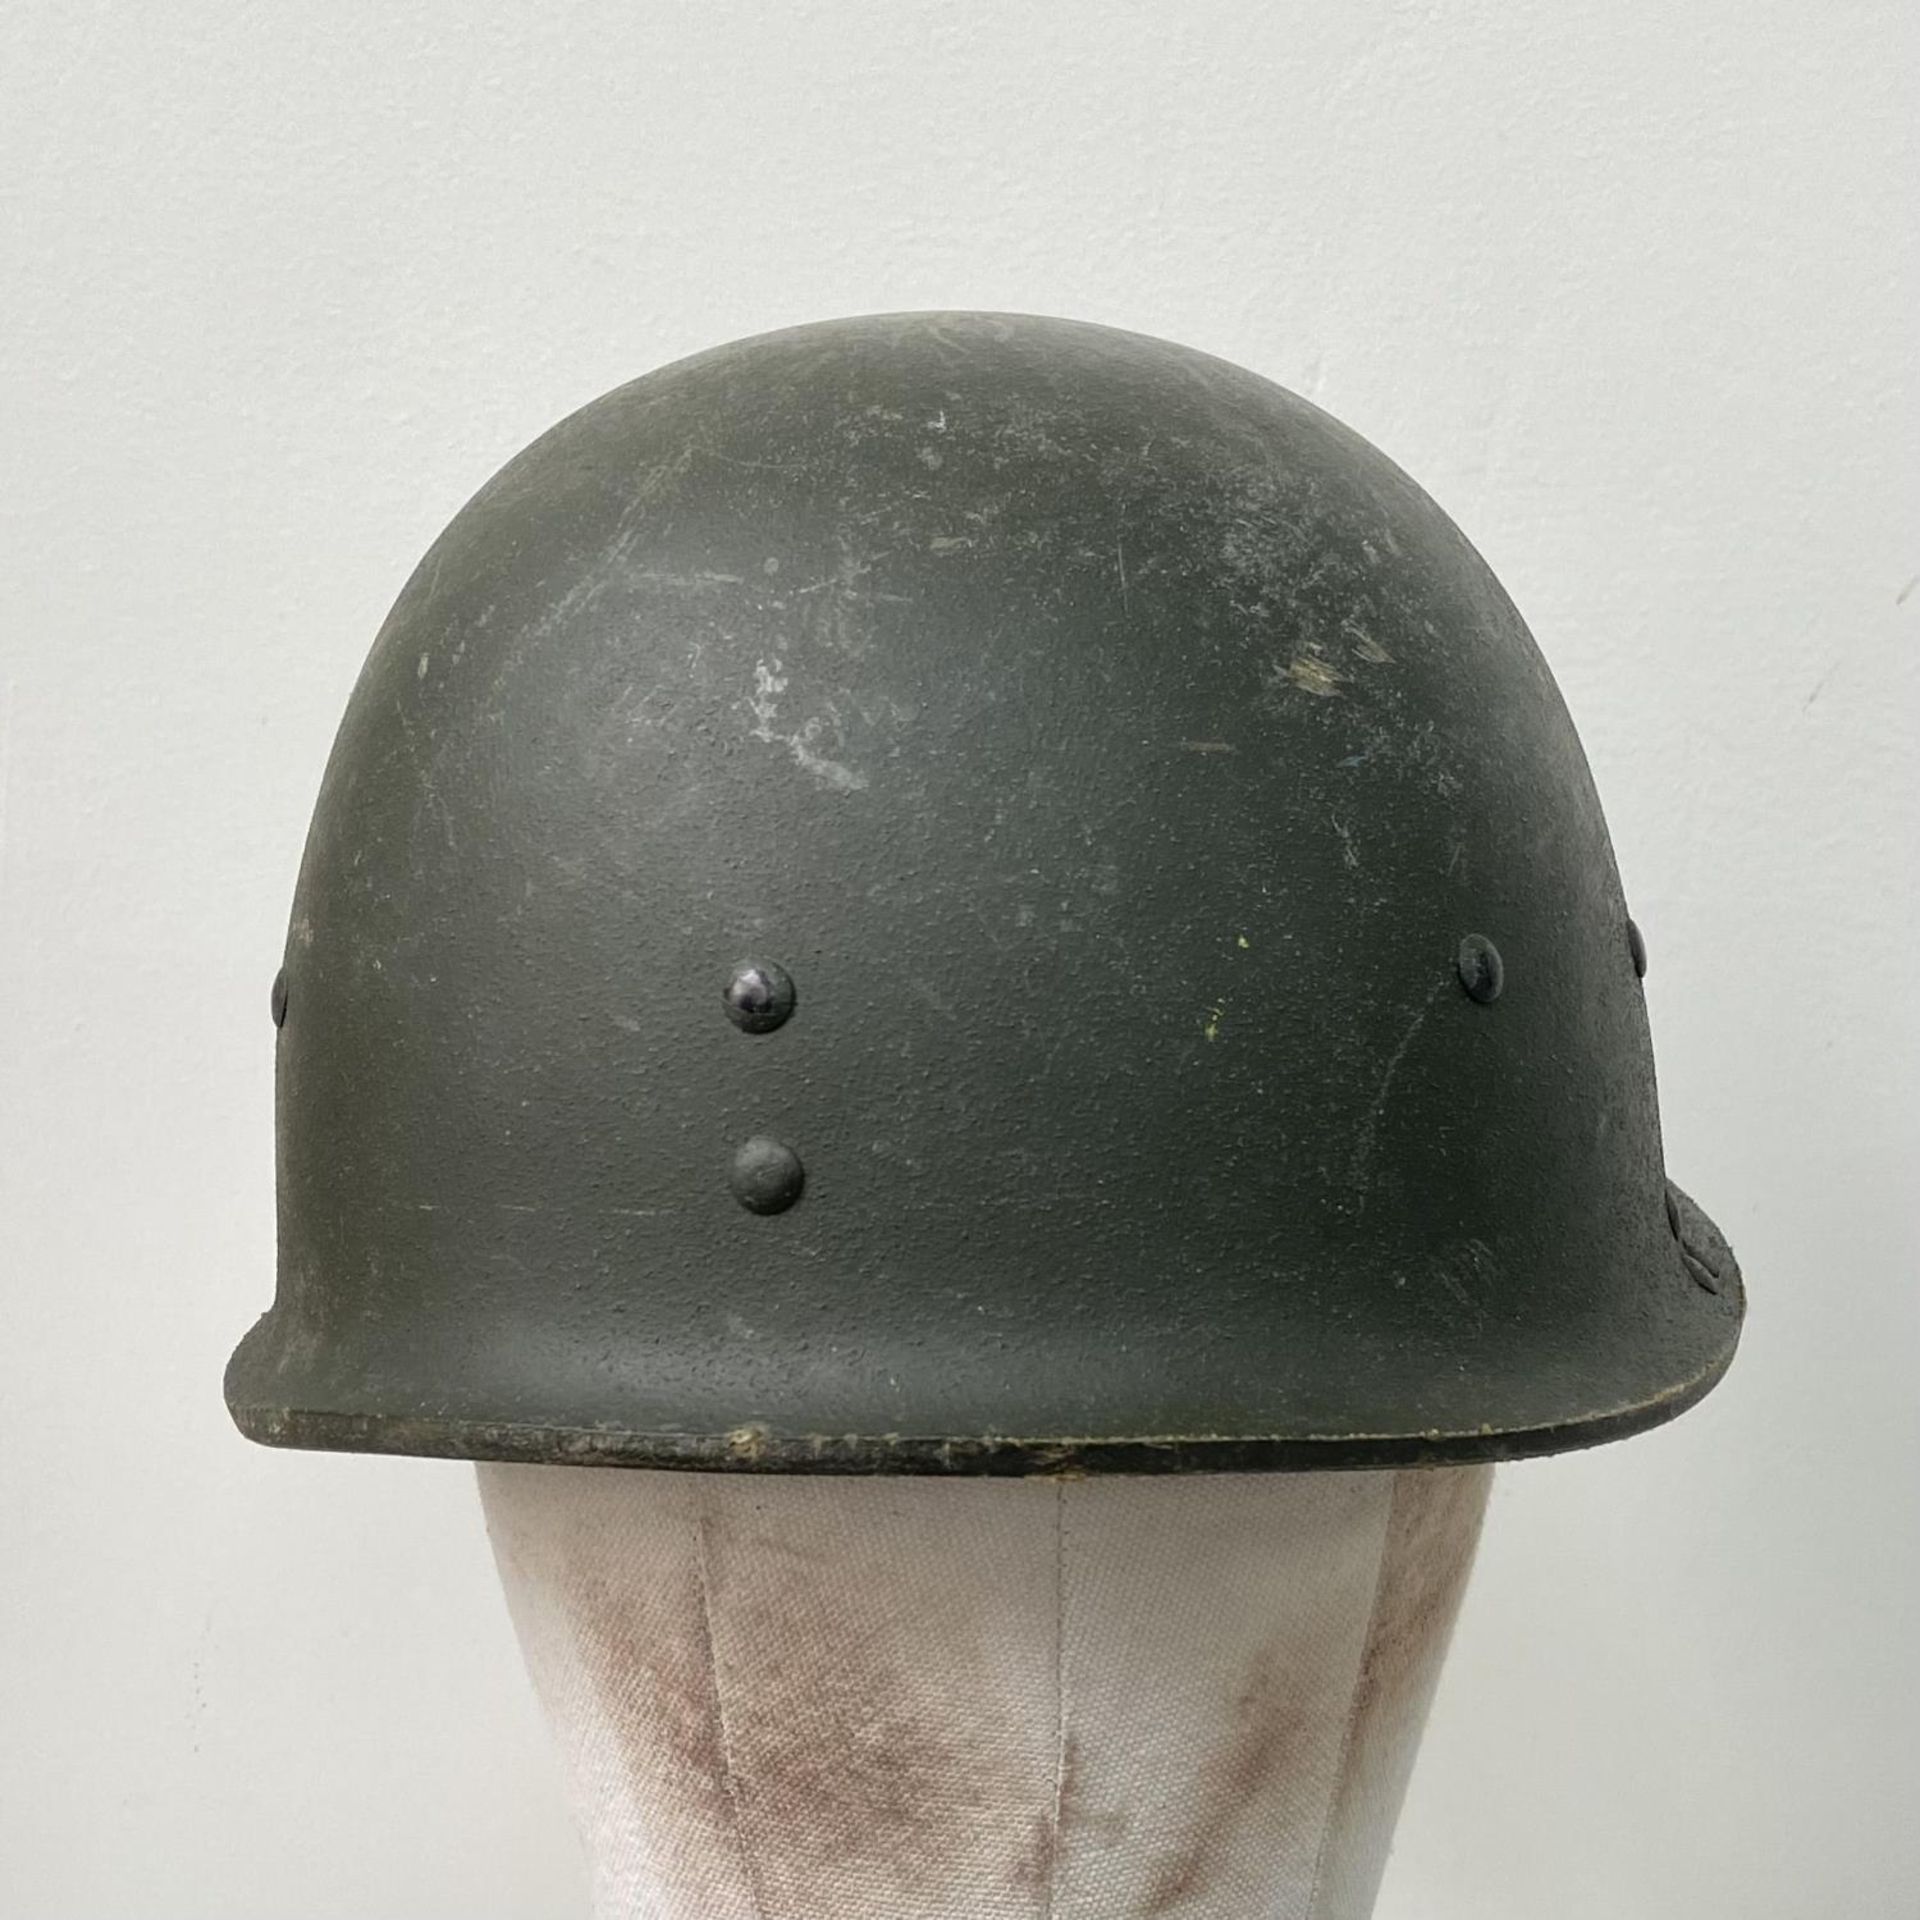 Gulf War 1 Veteran Bring Back Iraqi M80 Helmet. This helmet is in super condition as it never saw - Image 3 of 5